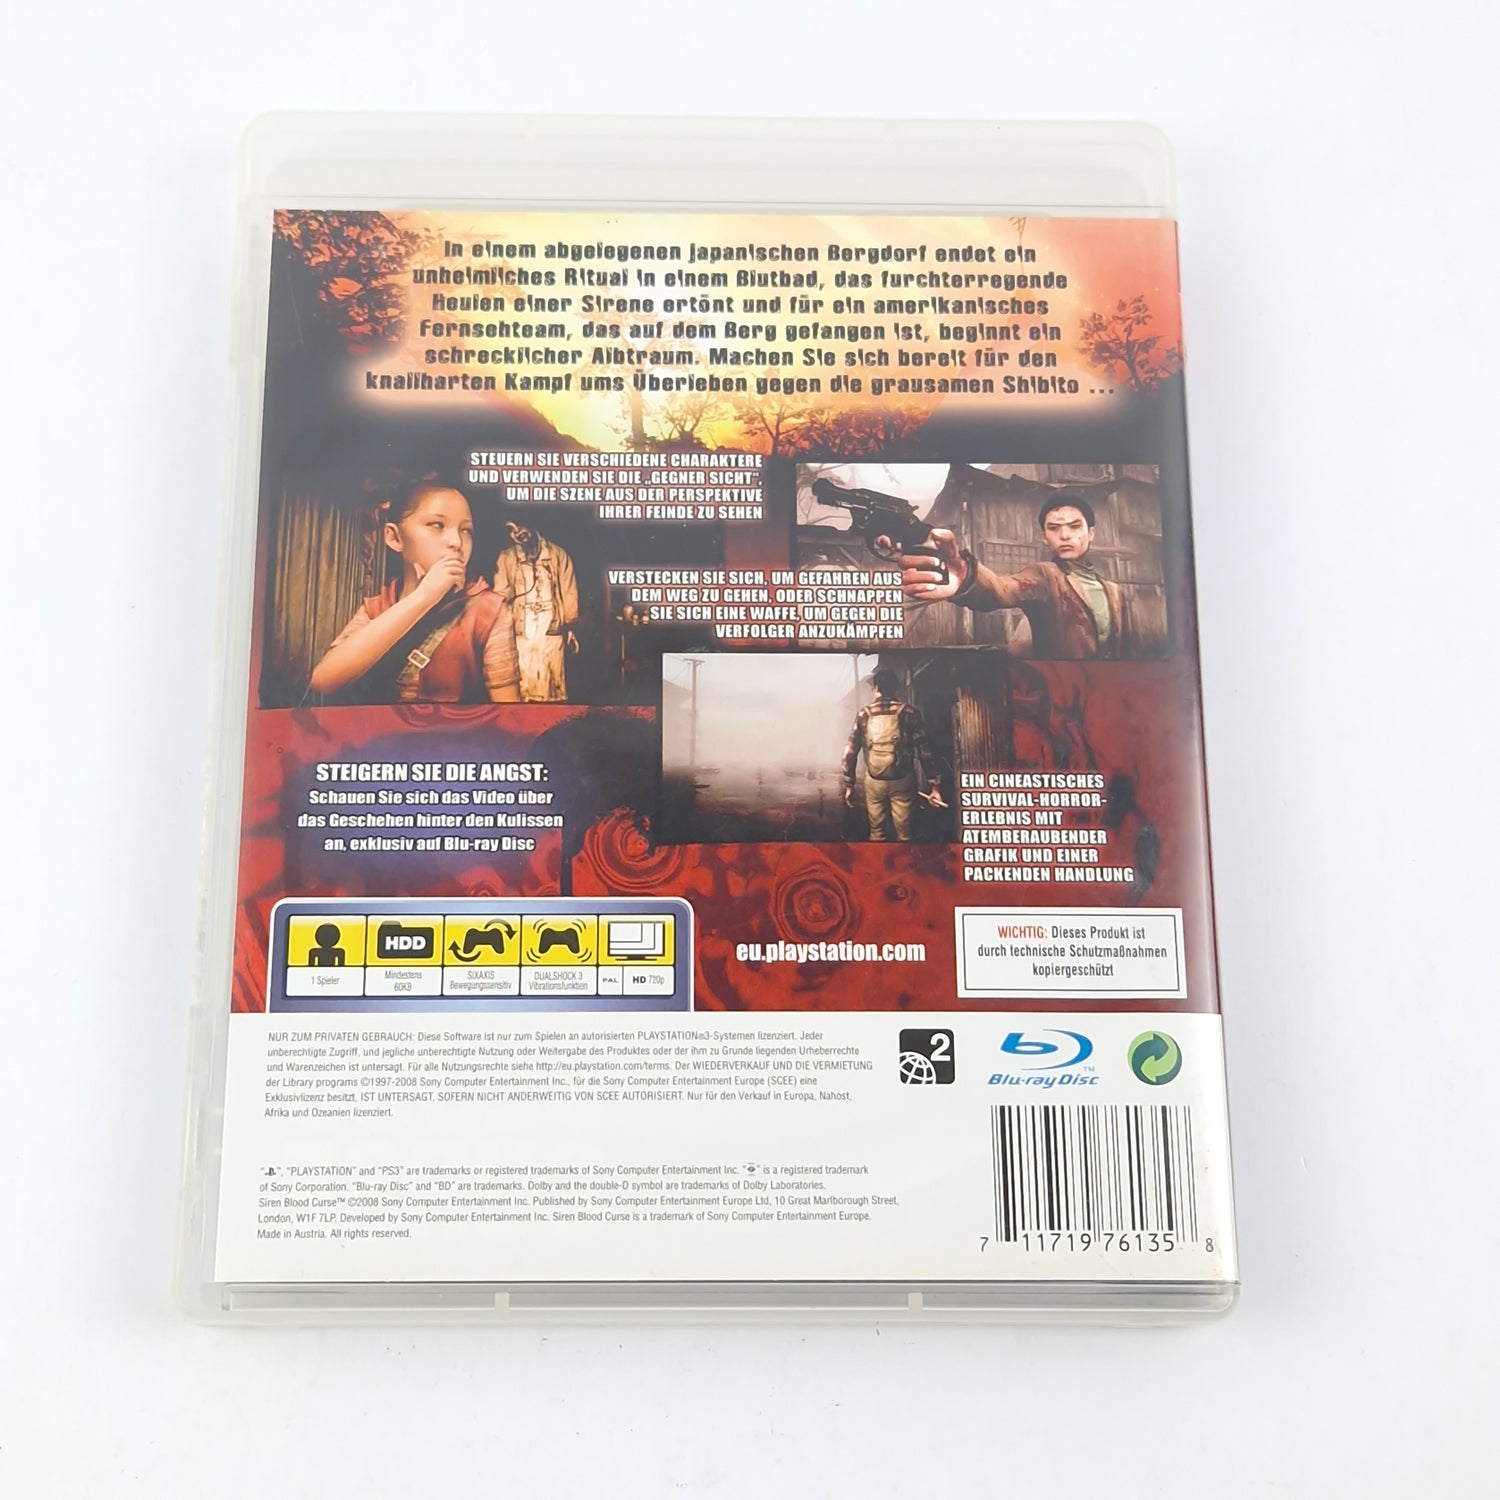 Playstation 3 game: Siren Blood Curse - OVP instructions CD - SONY PS3 USK18